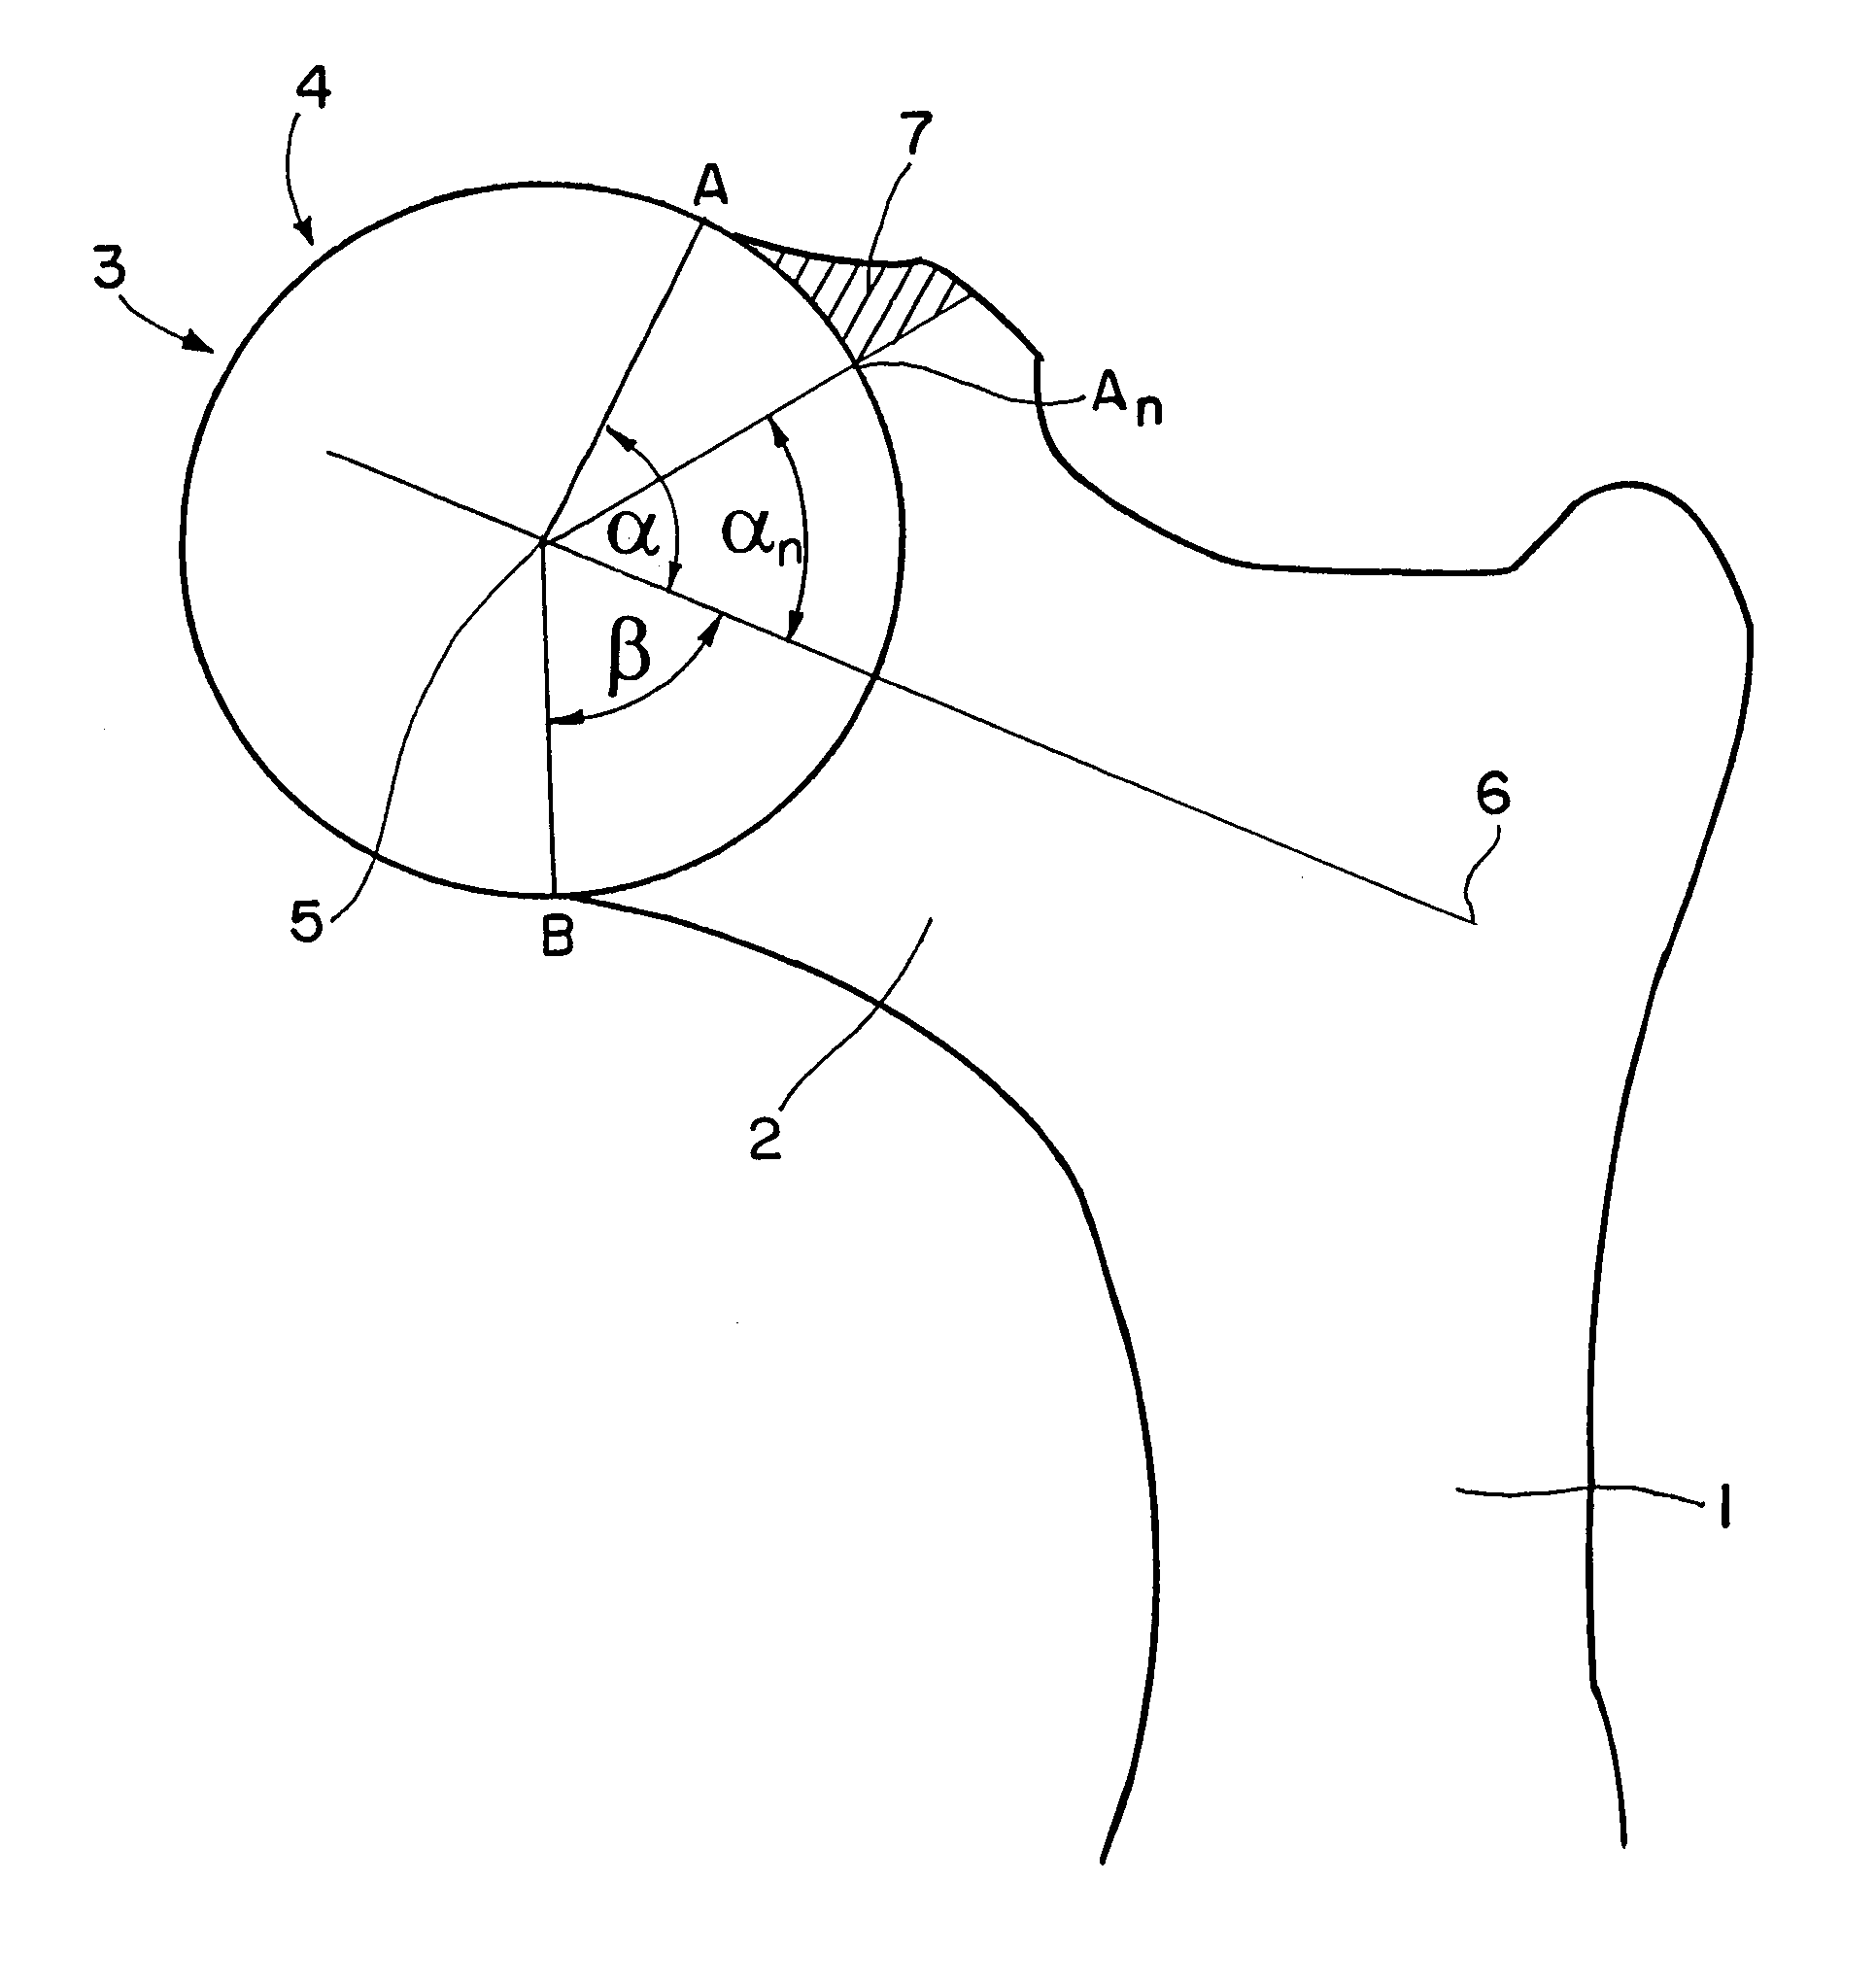 Computer-assisted planning method for correcting changes in the shape of joint bones